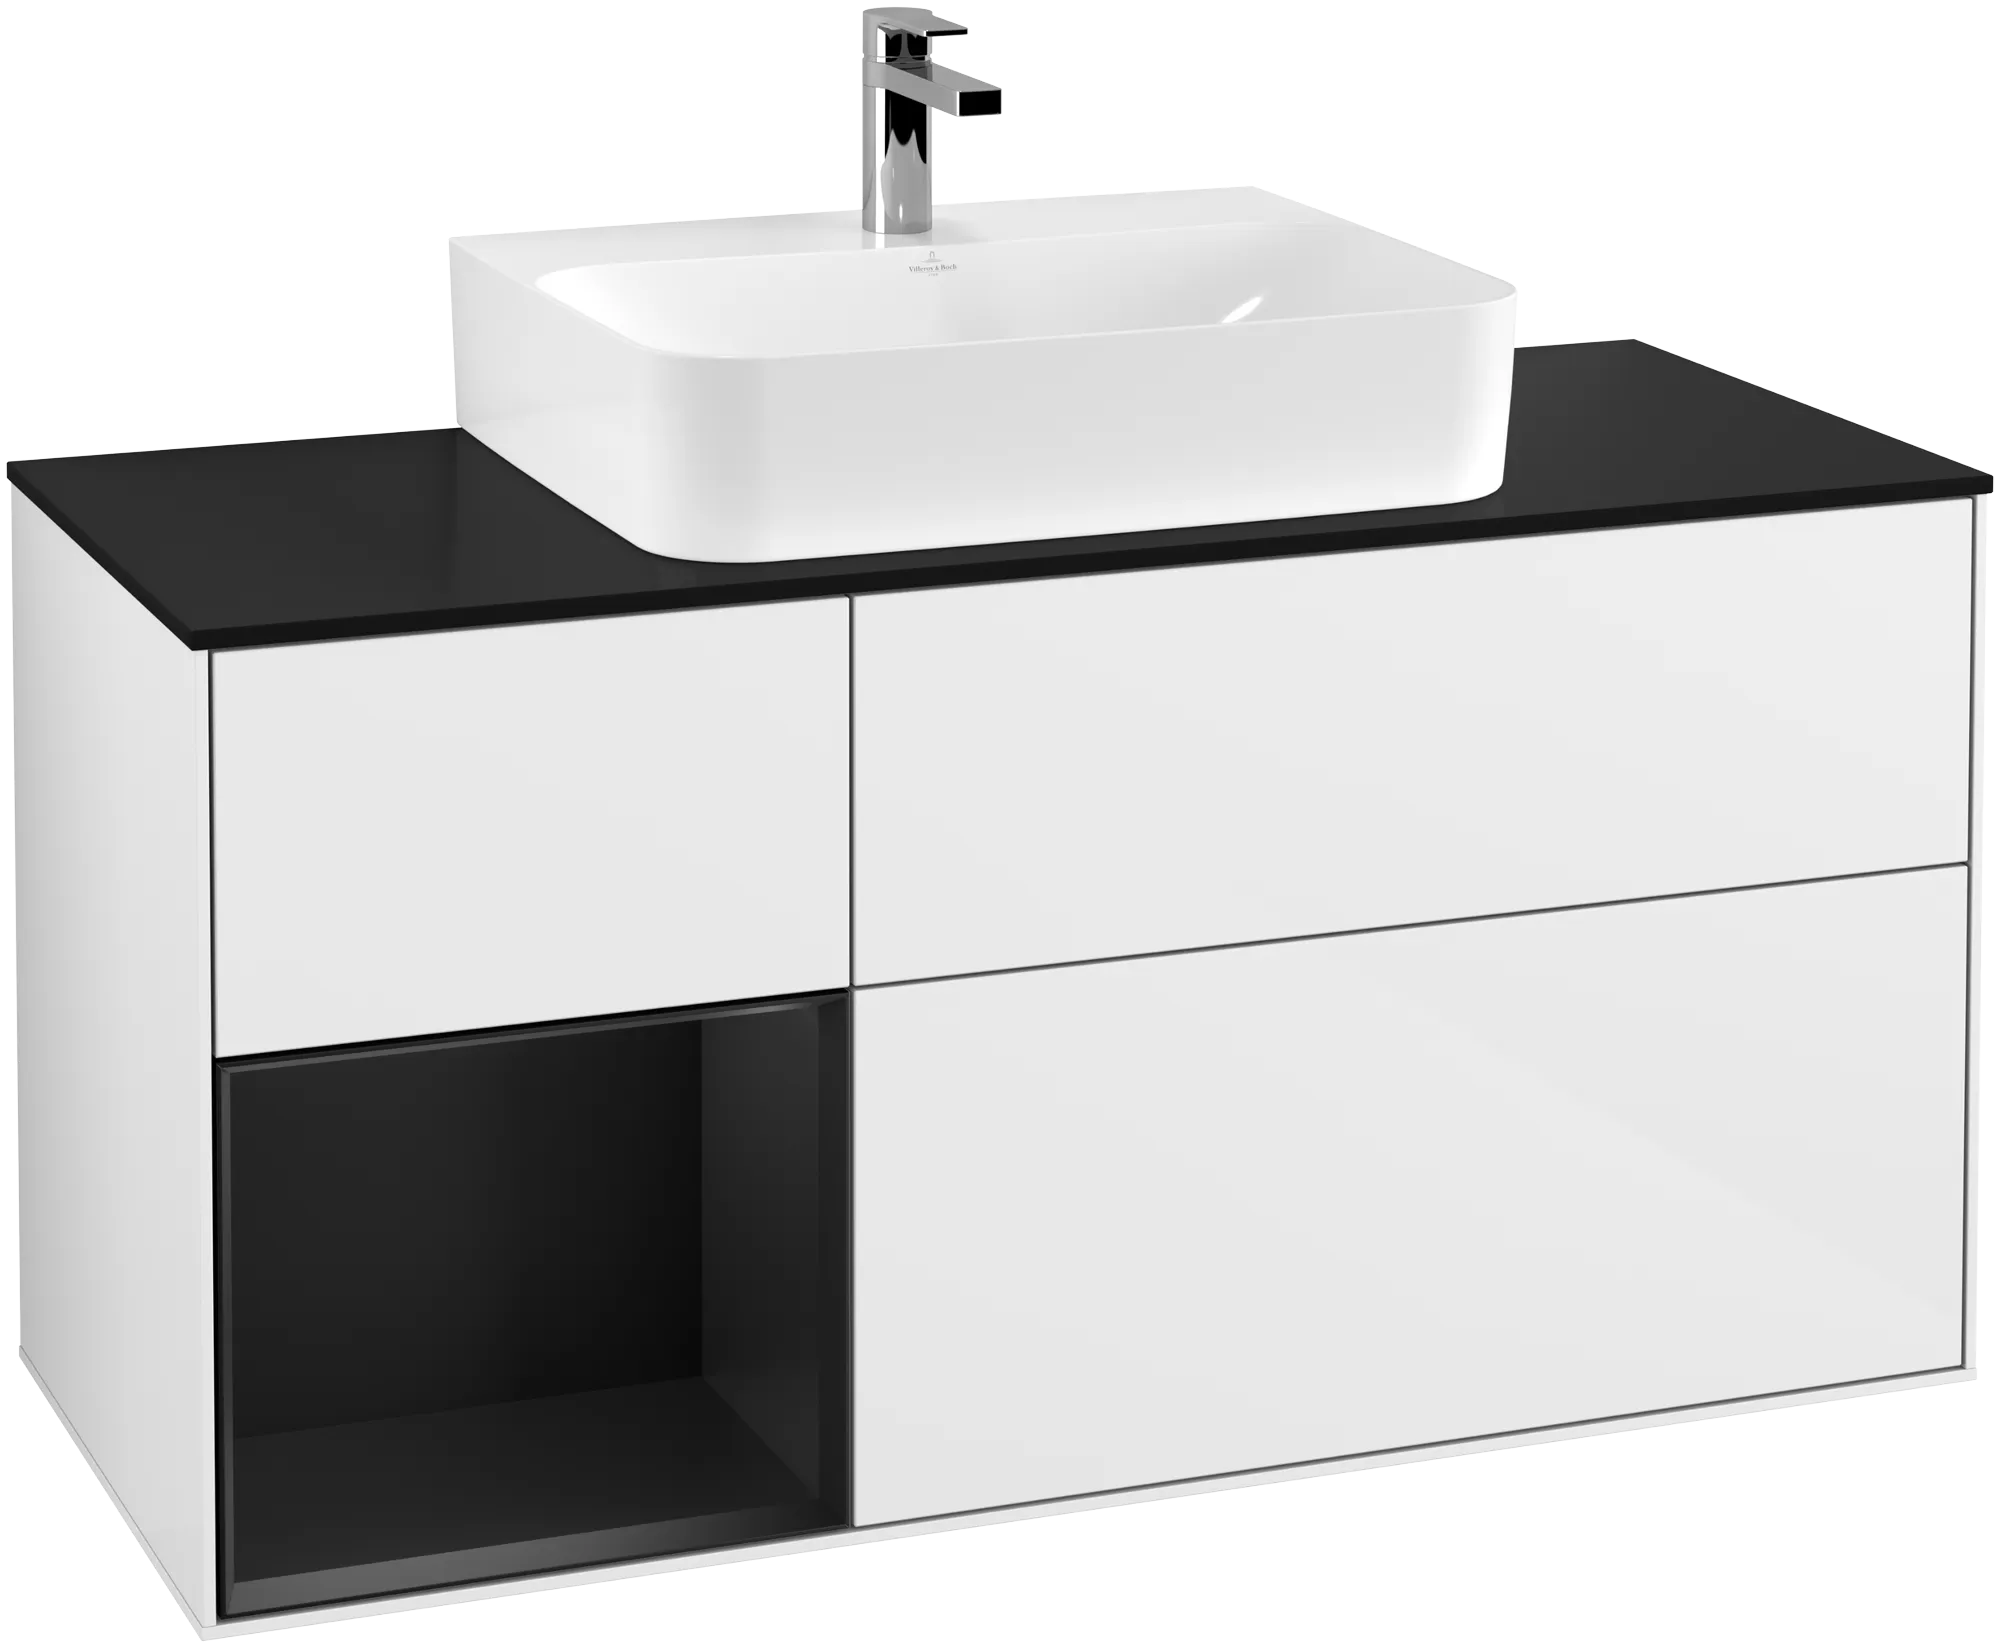 Picture of VILLEROY BOCH Finion Vanity unit, with lighting, 3 pull-out compartments, 1200 x 603 x 501 mm, Glossy White Lacquer / Black Matt Lacquer / Glass Black Matt #G162PDGF